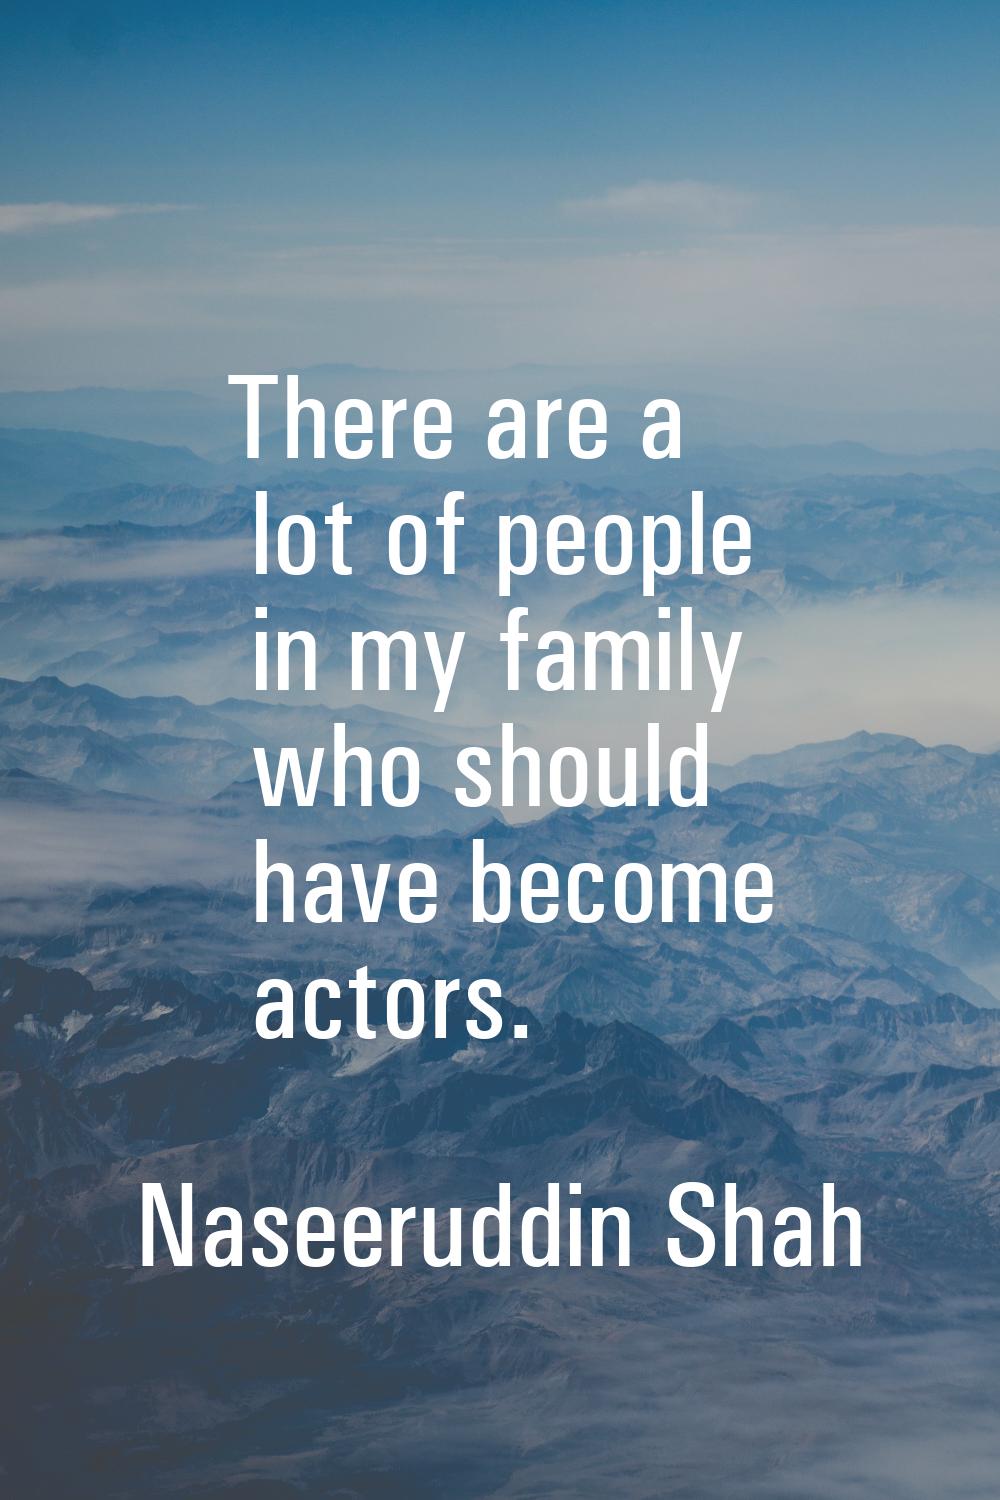 There are a lot of people in my family who should have become actors.